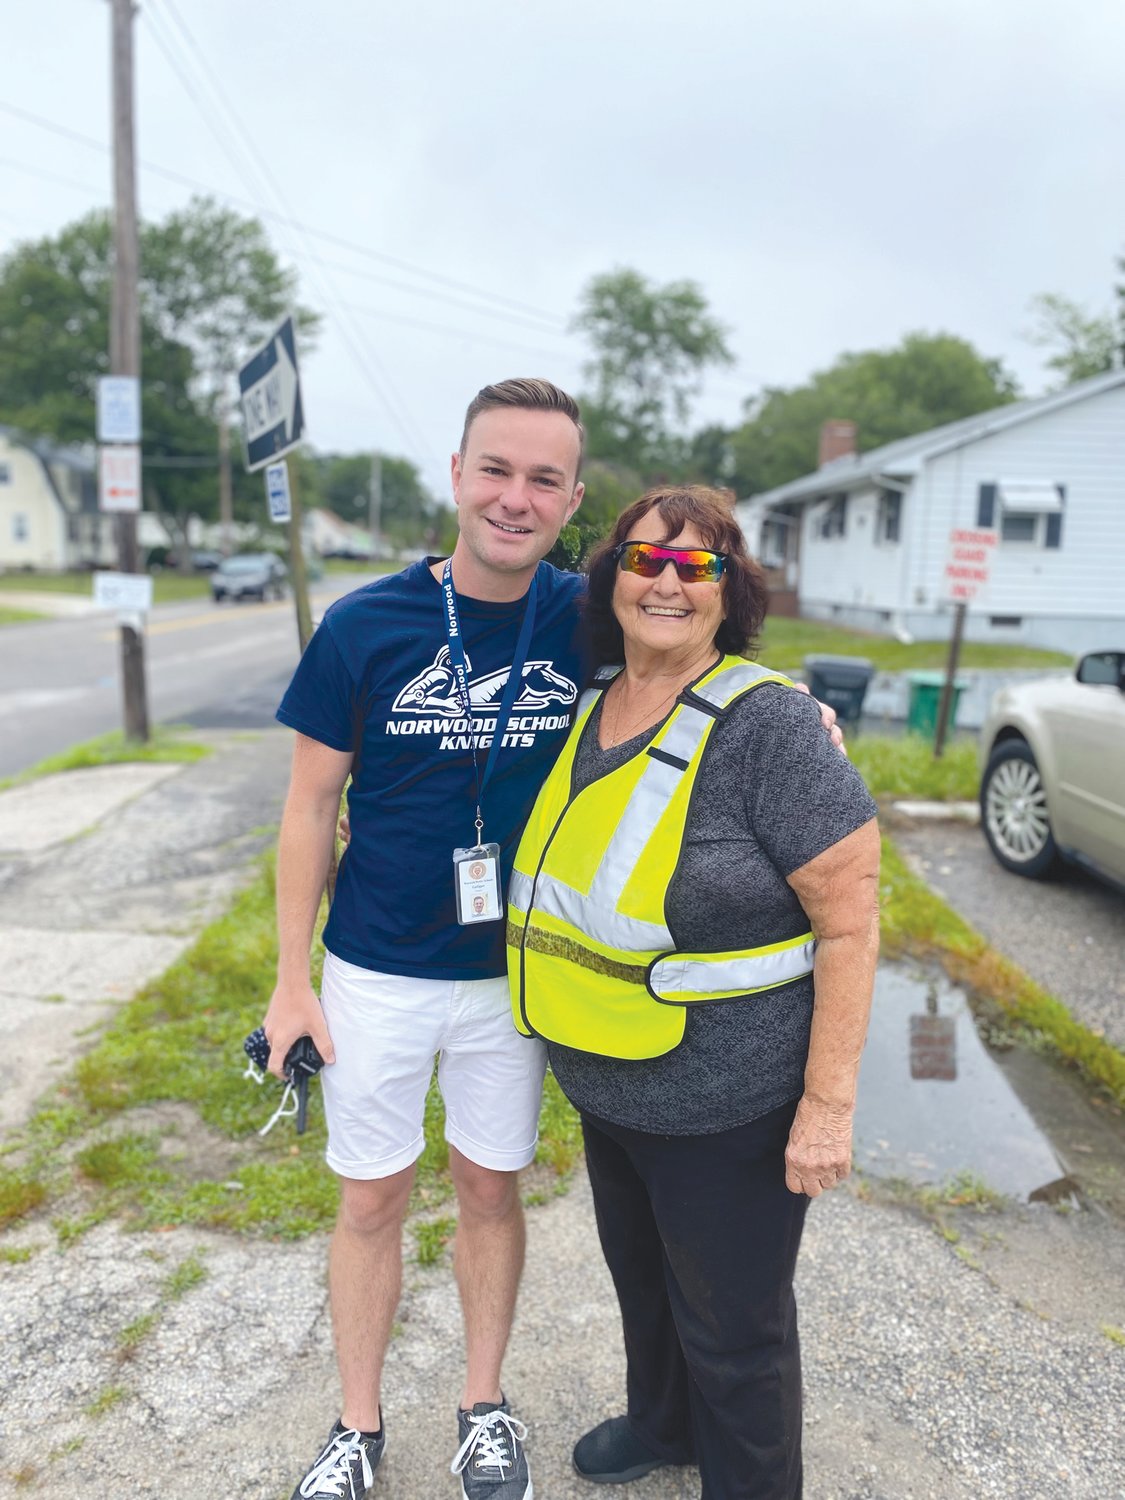 NOMINEE: Warwick Elementary School Principal Frank Galligan is a nominee for the Rhode Island Outstanding Beginning Principal of the Year award. He is pictured here with crossing guard Gerry Davis while serving as interim principal at Norwood School.